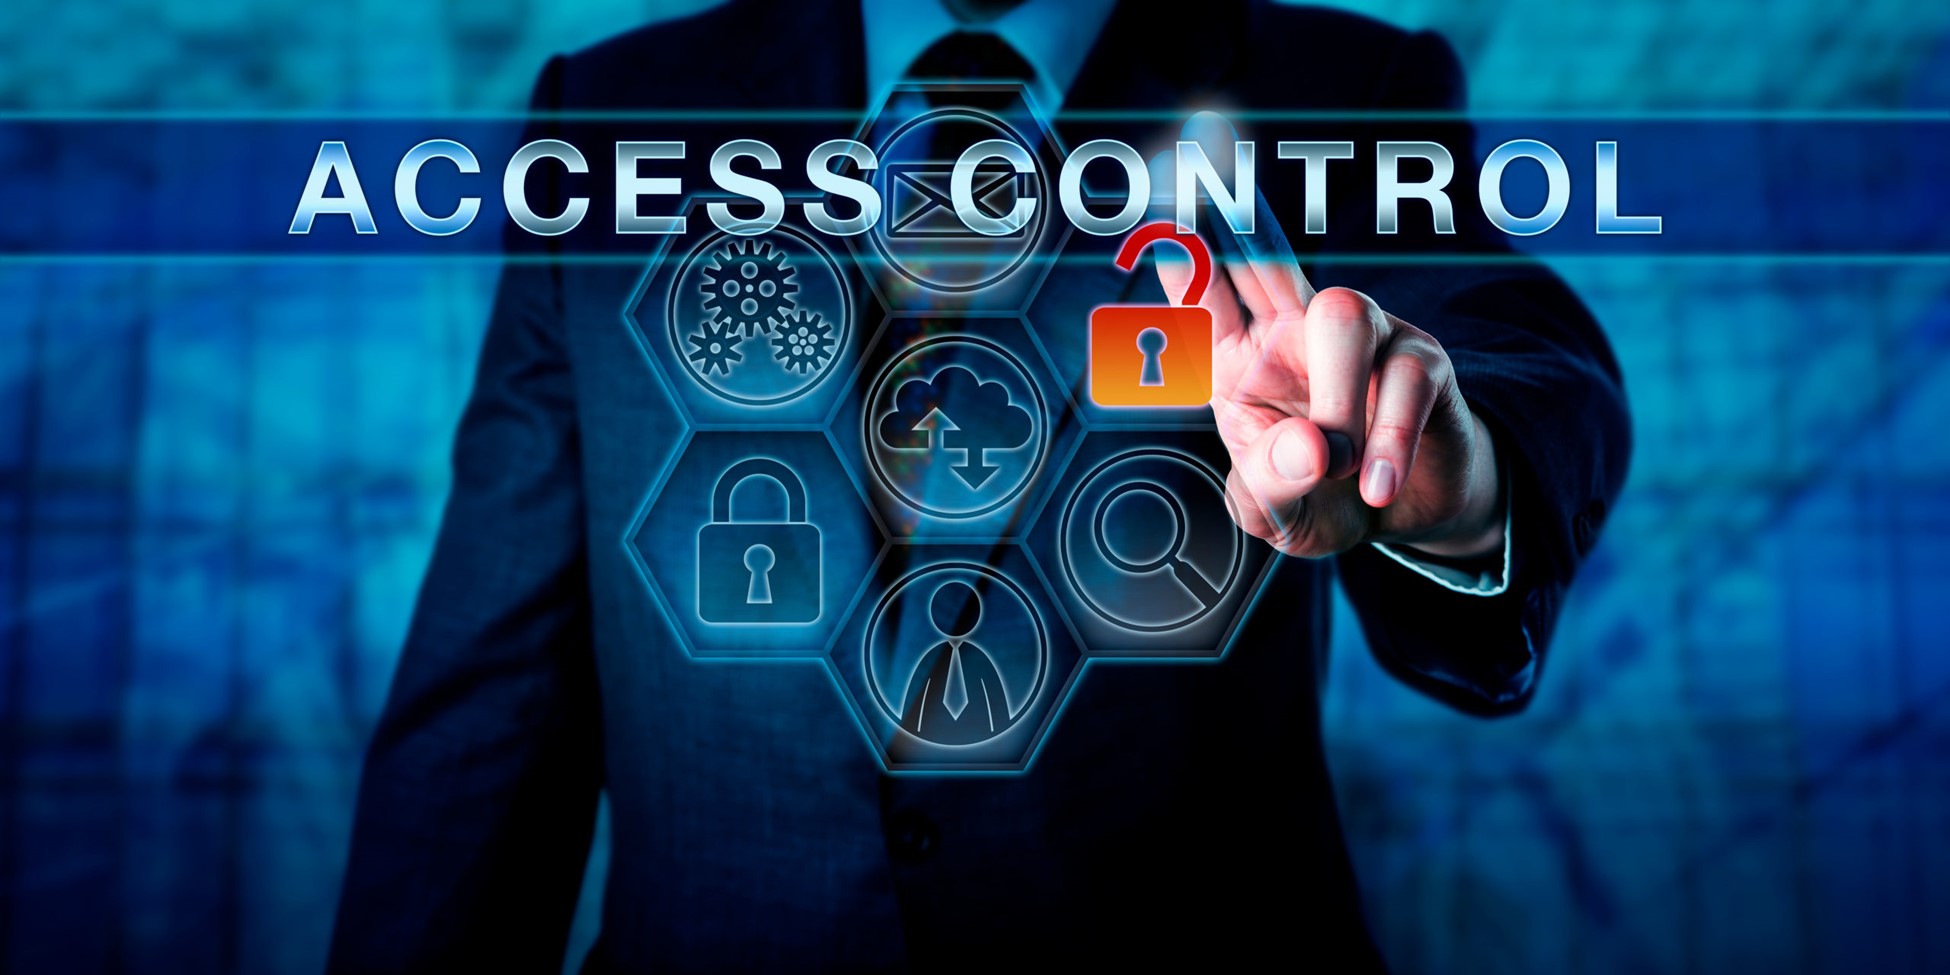 Role based access control blog image